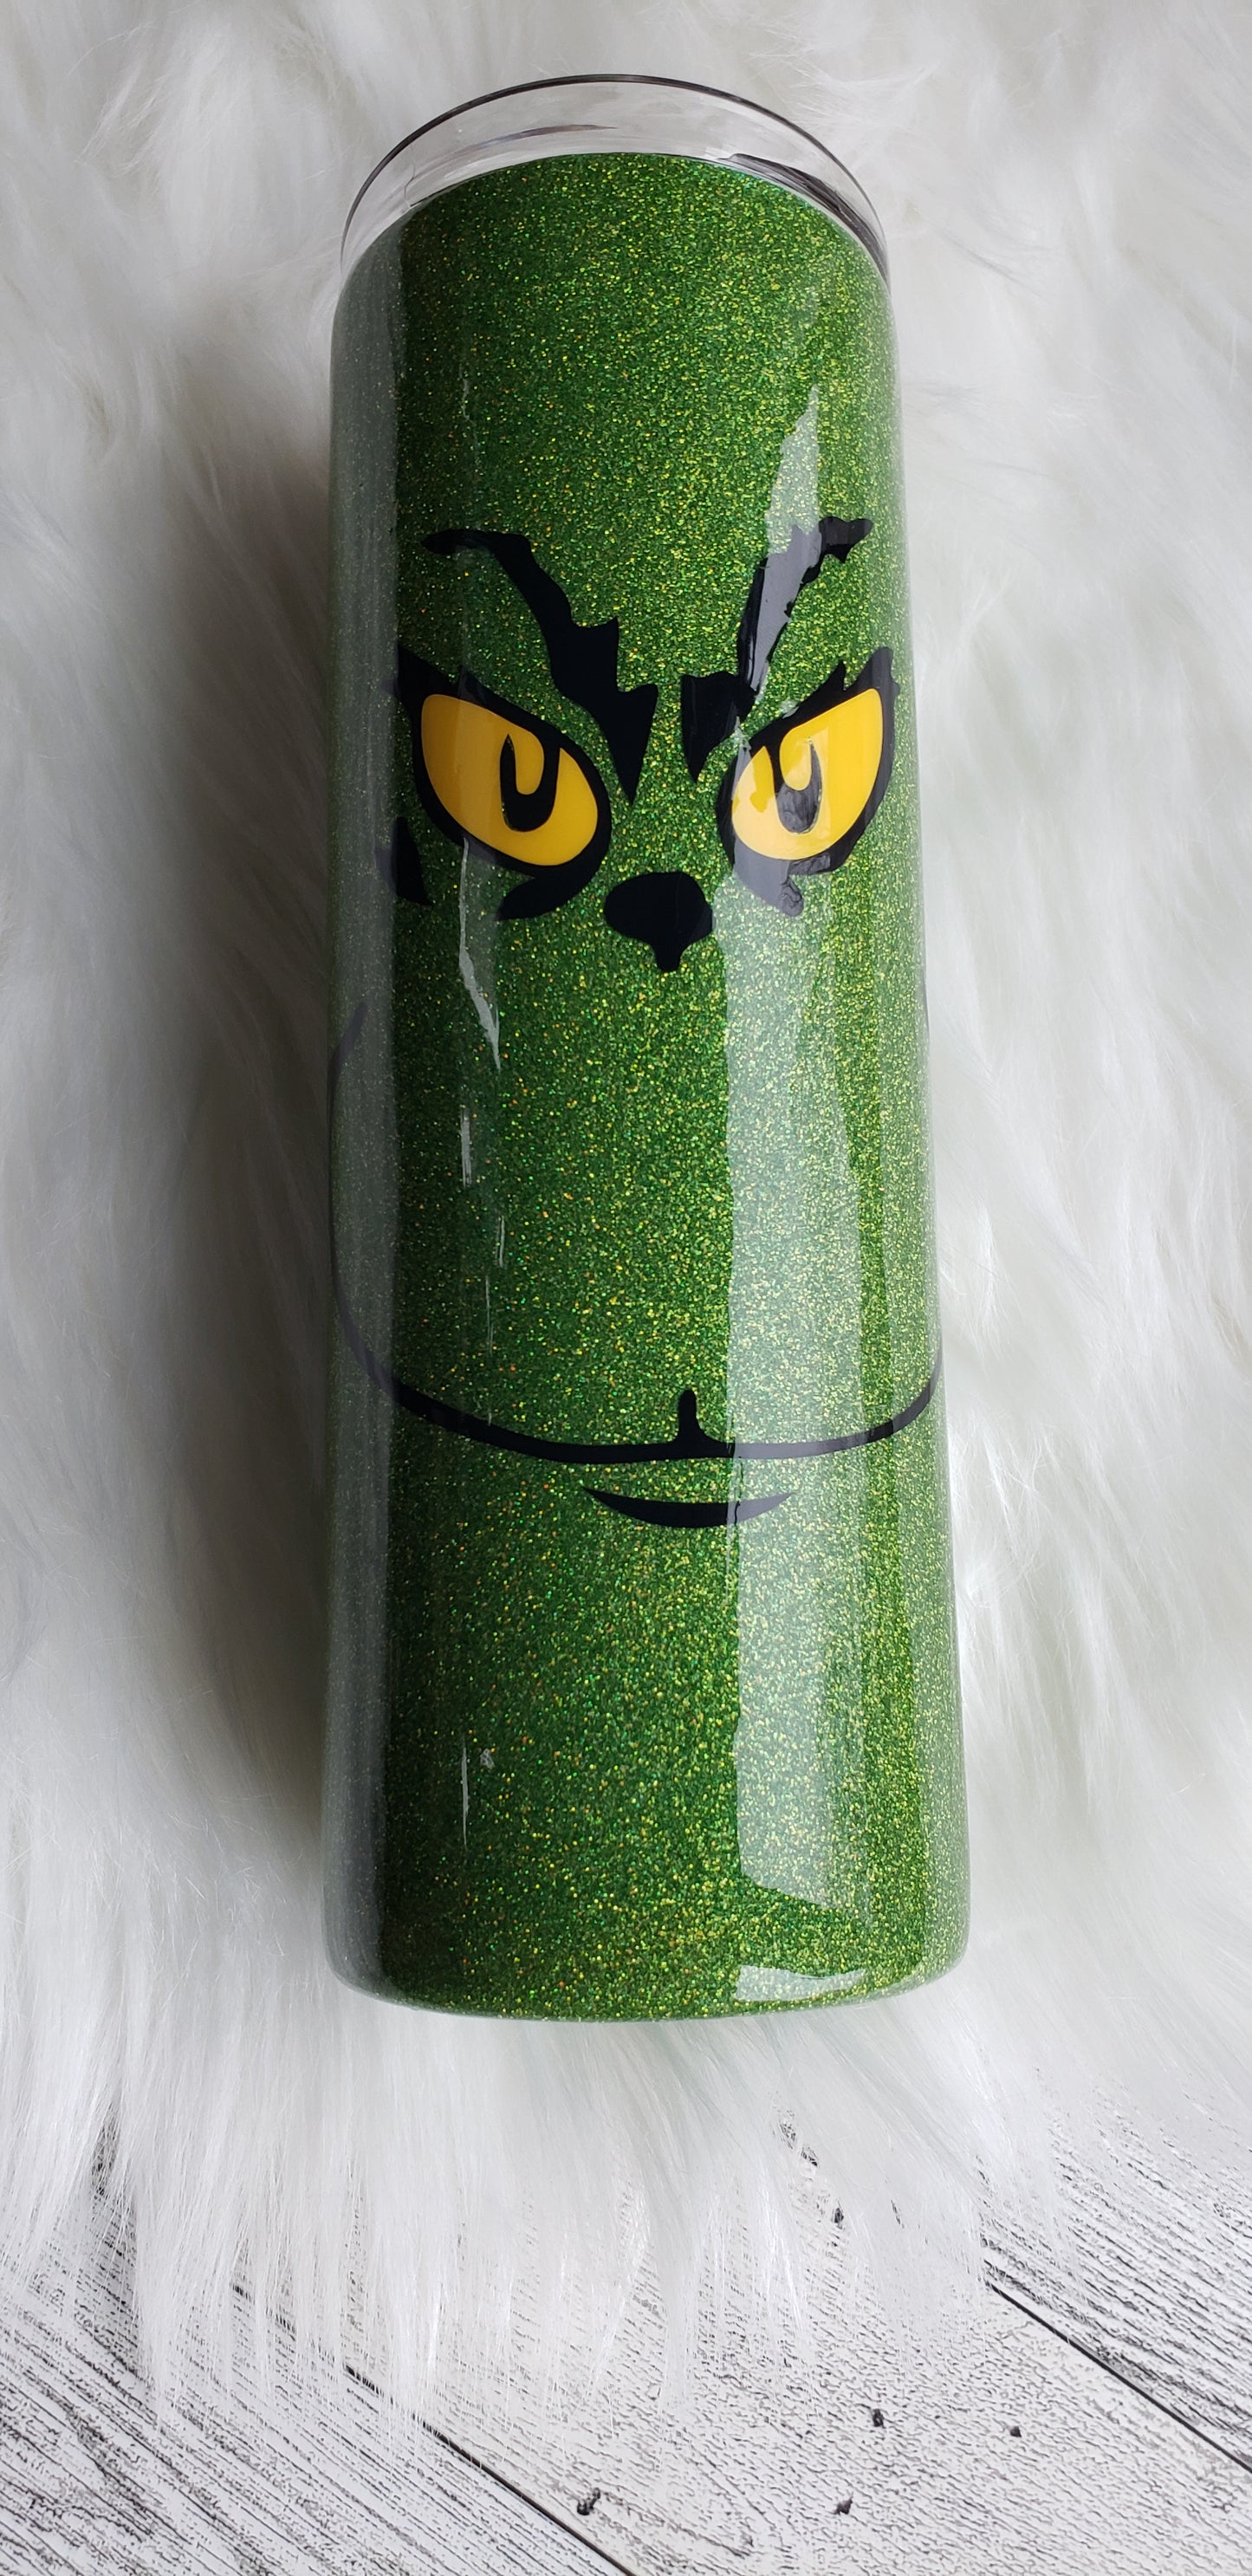 20 oz Green Guy Stainless Steal Tumbler